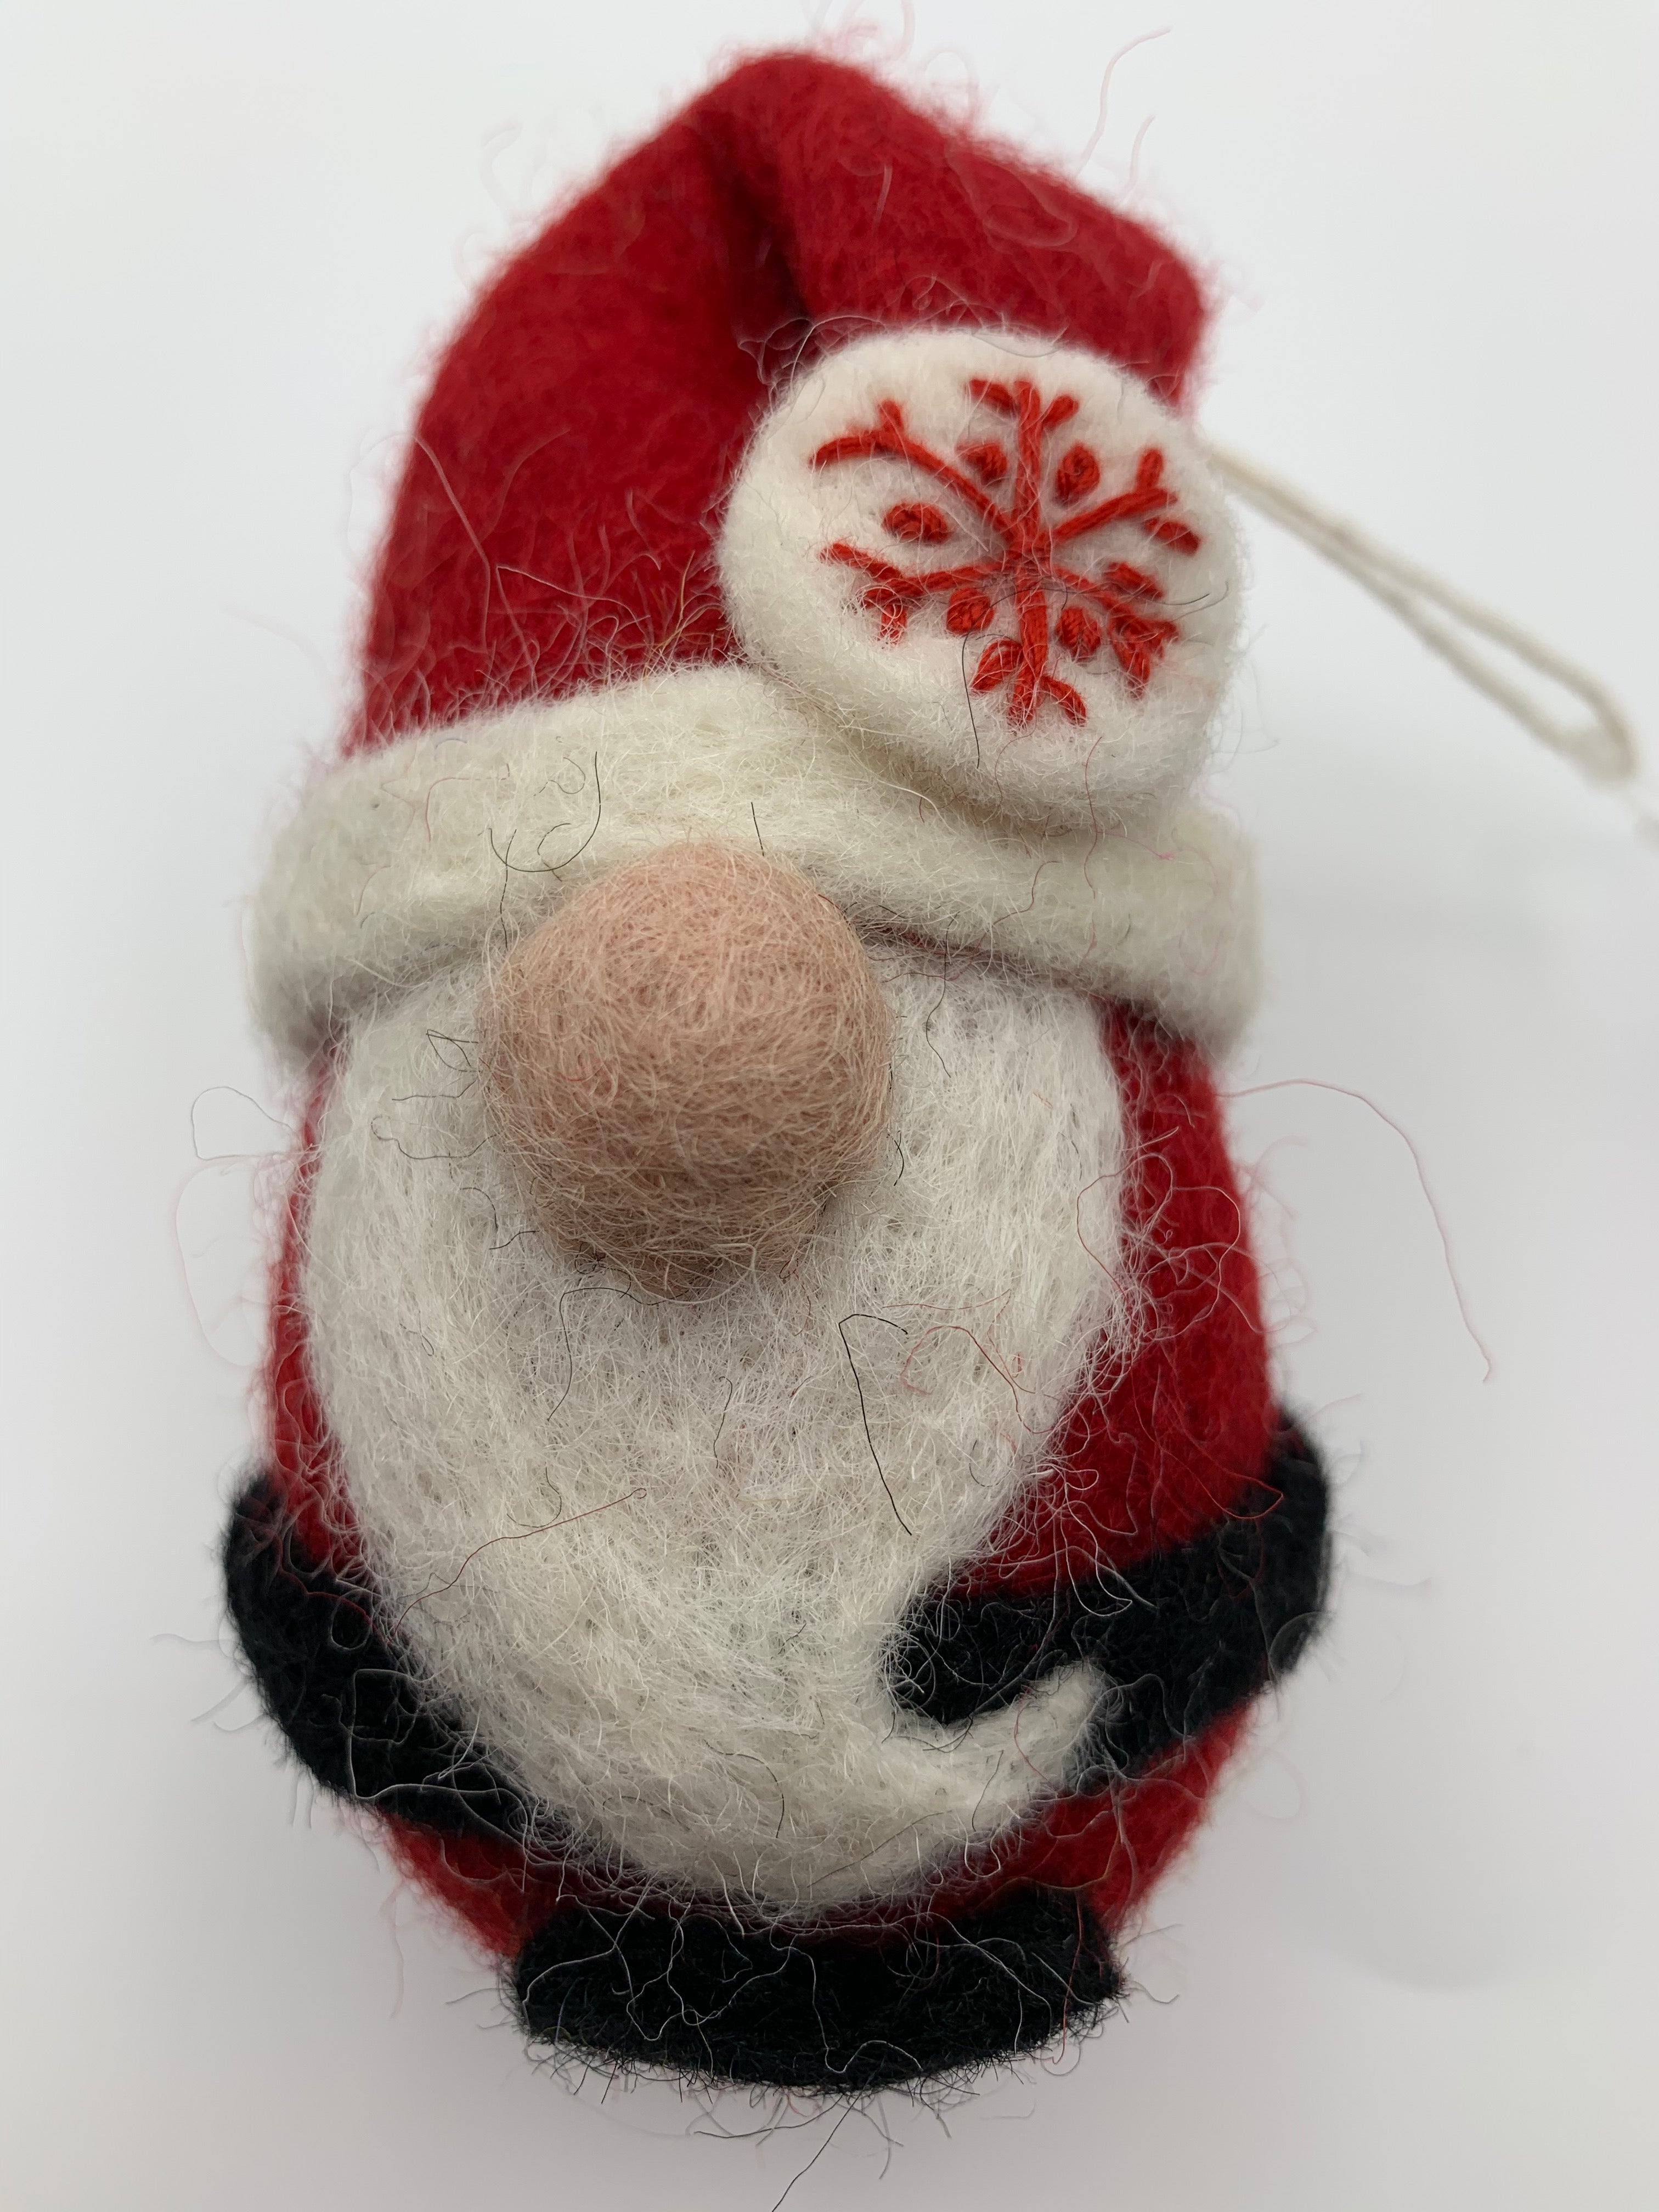 This is a close-up photo of the Santa Claus Ornament that is handcrafted (fair trade) and made with 100% natural wool. He has a red body and a red hat with white trim, a long beard, a round nose and black accents (belt and feet/boots). Approximately 4"x2.25". He comes with a fair trade holiday "to/from" tag to use if giving this as a gift.